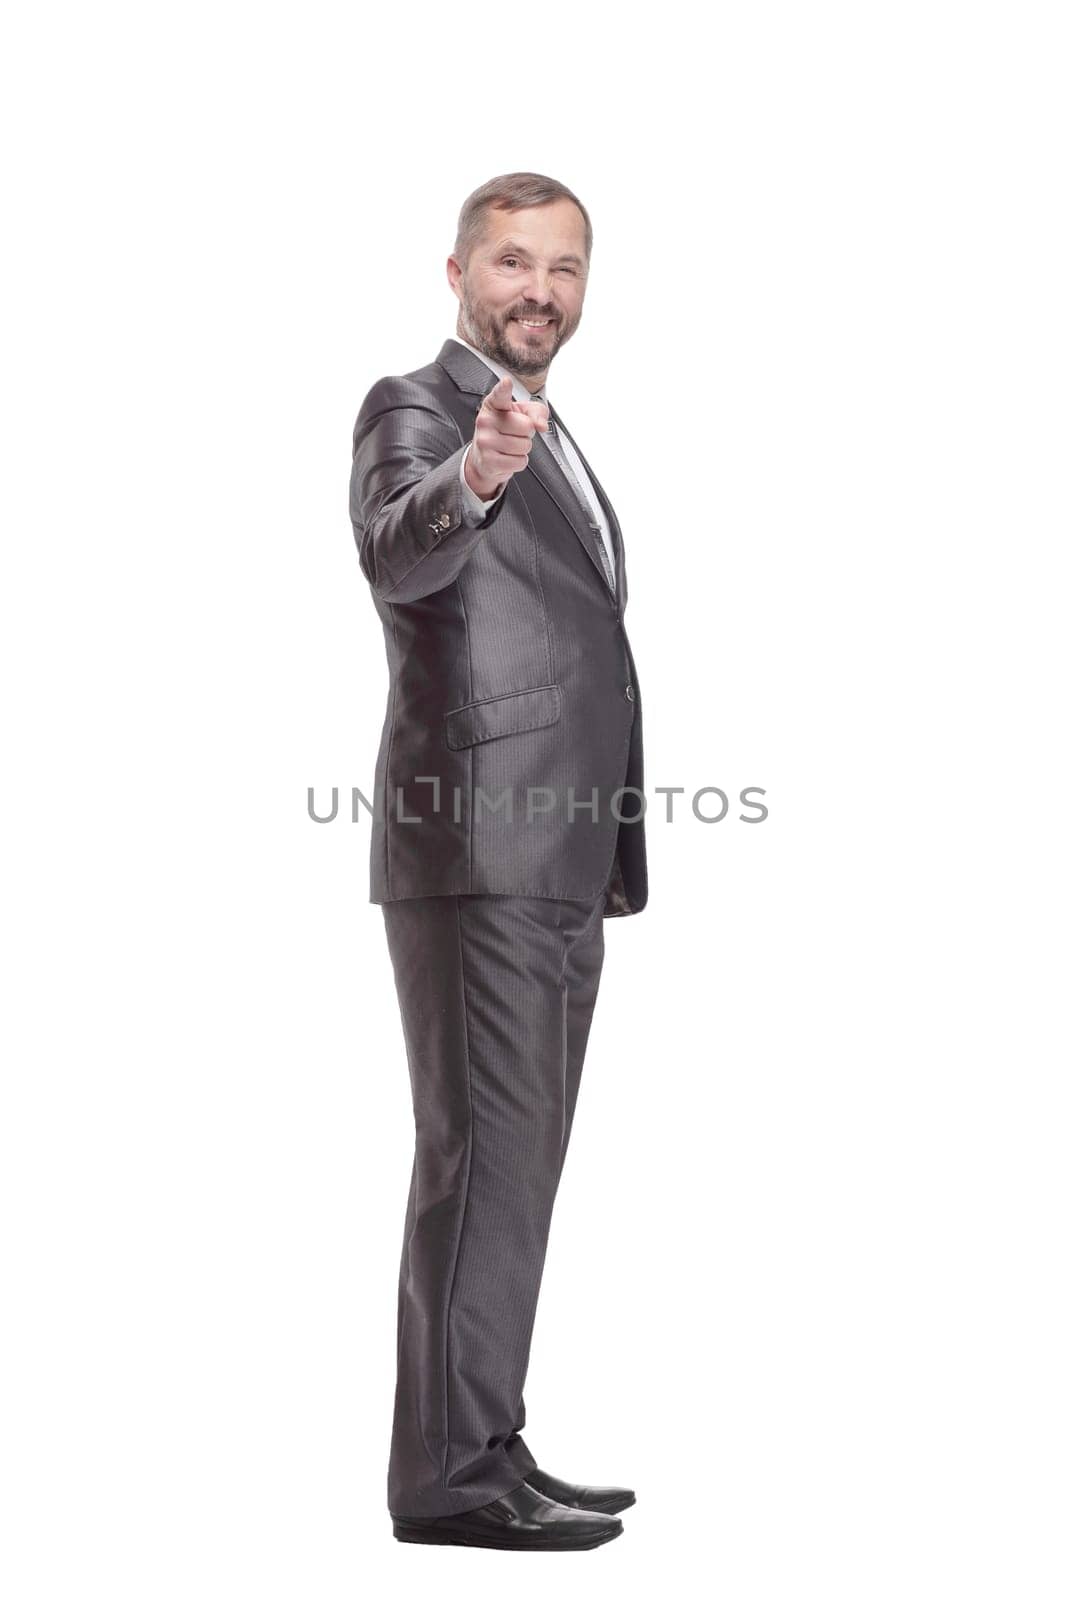 in full growth. handsome business man. isolated on a white background.